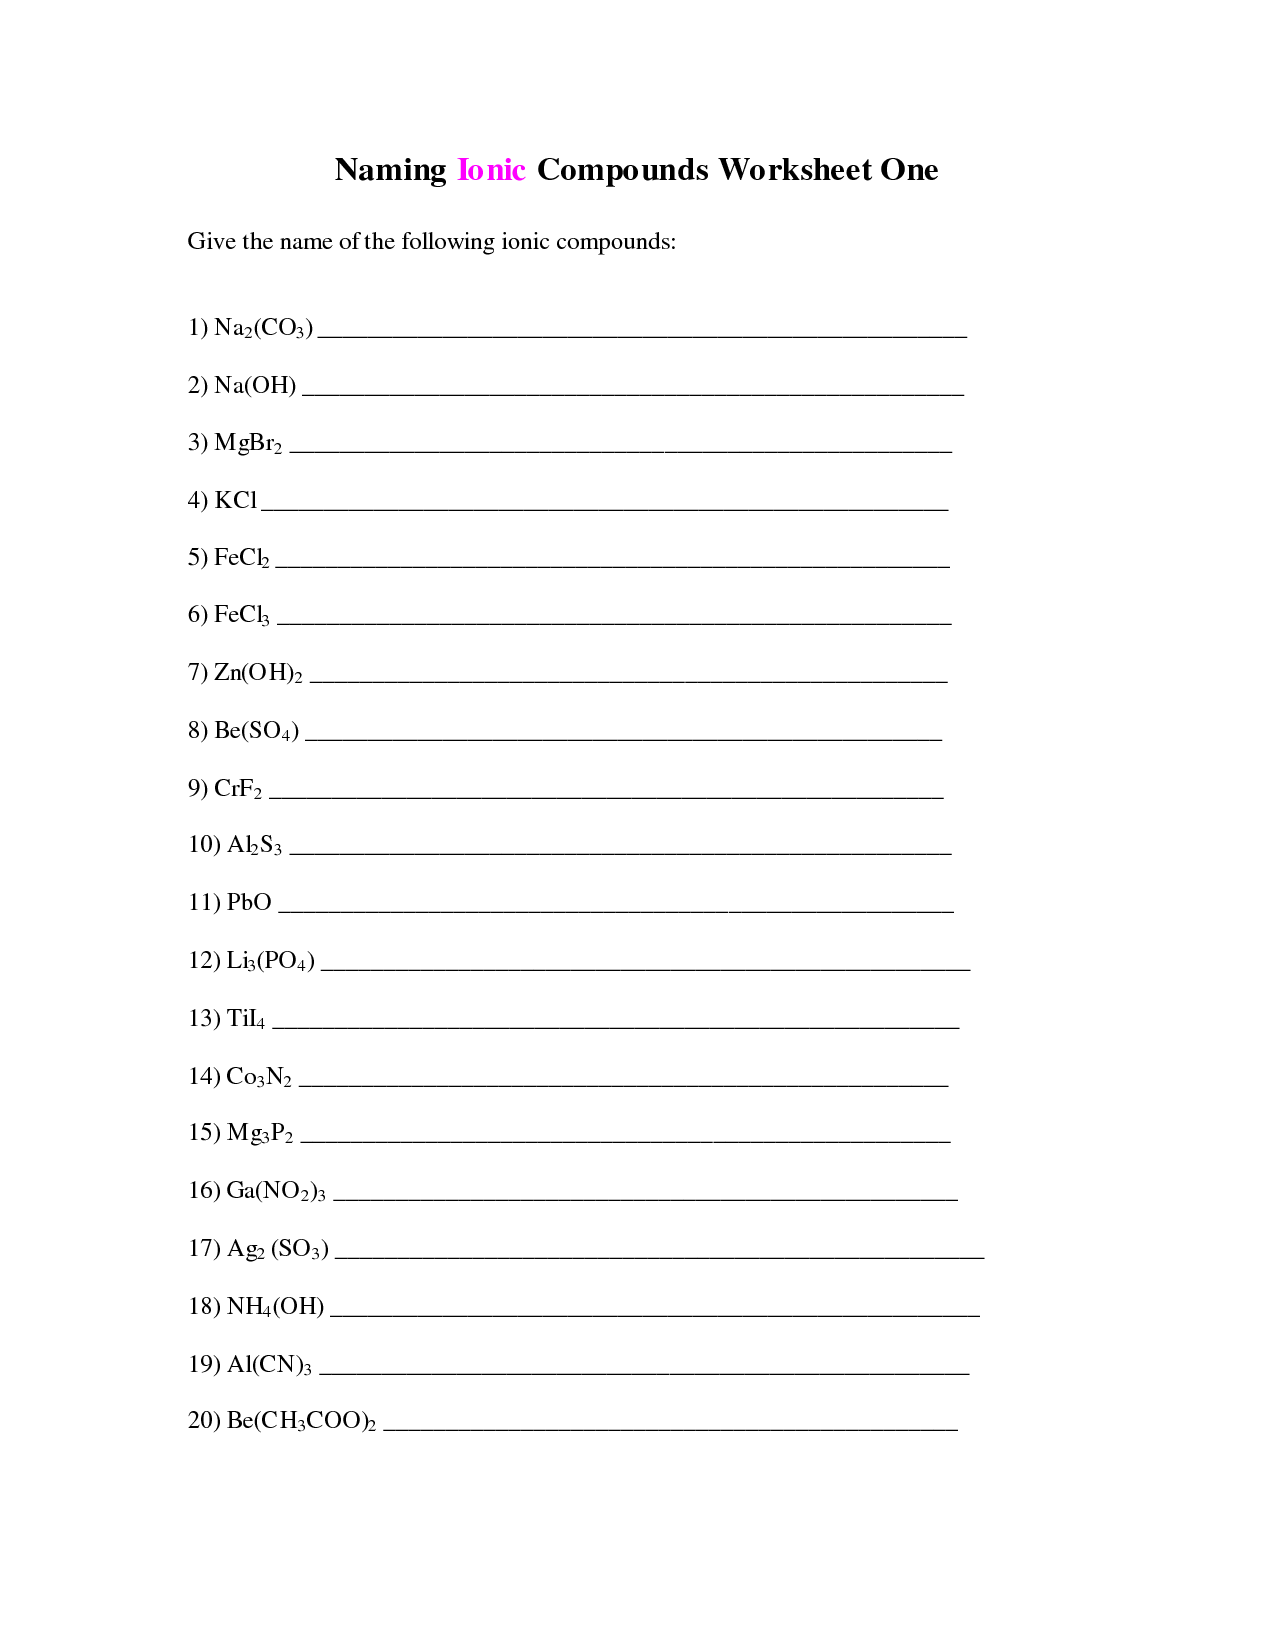 7-best-images-of-naming-ionic-compounds-worksheet-one-naming-compounds-worksheet-naming